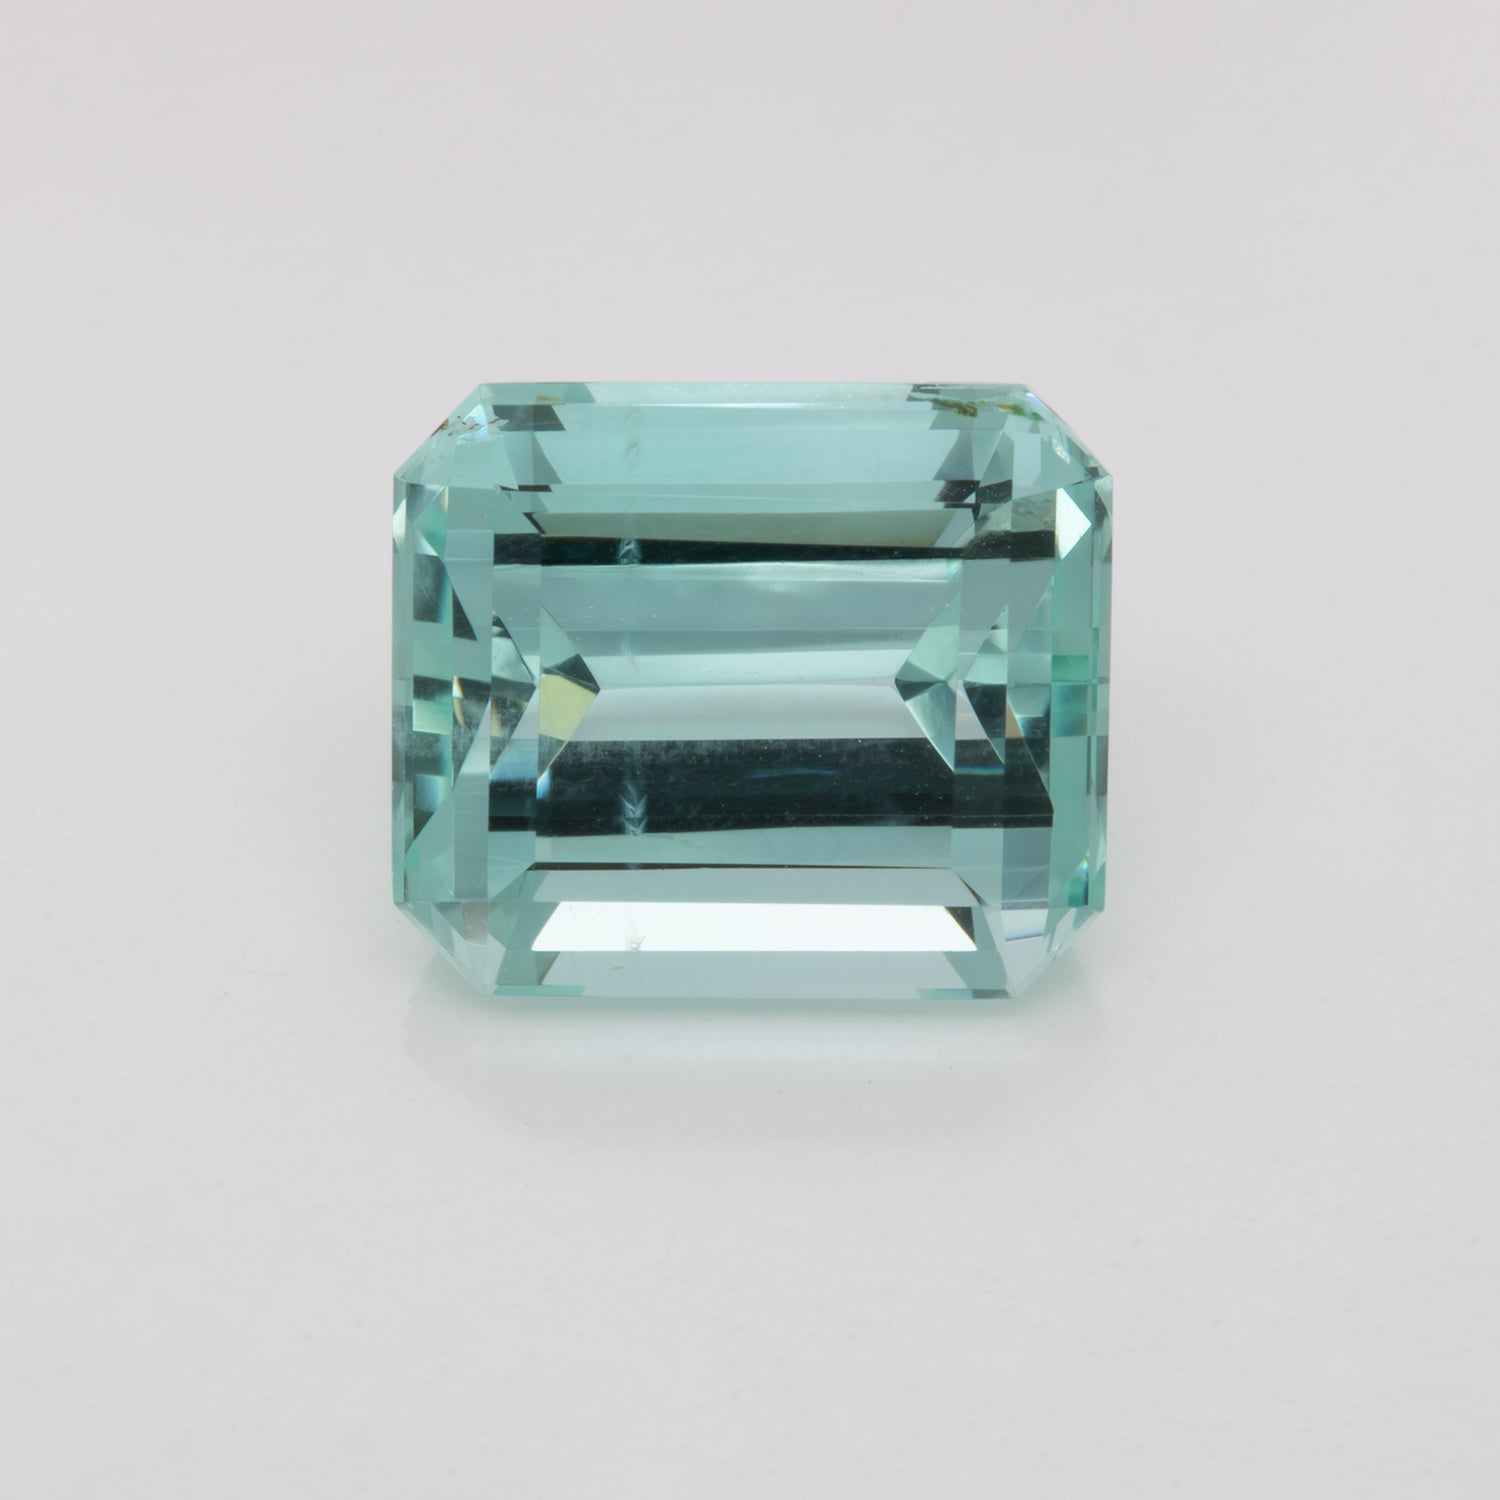 Beryl - green, octagon, 10,2x8,7 mm, 4,03 cts, No. BY90030